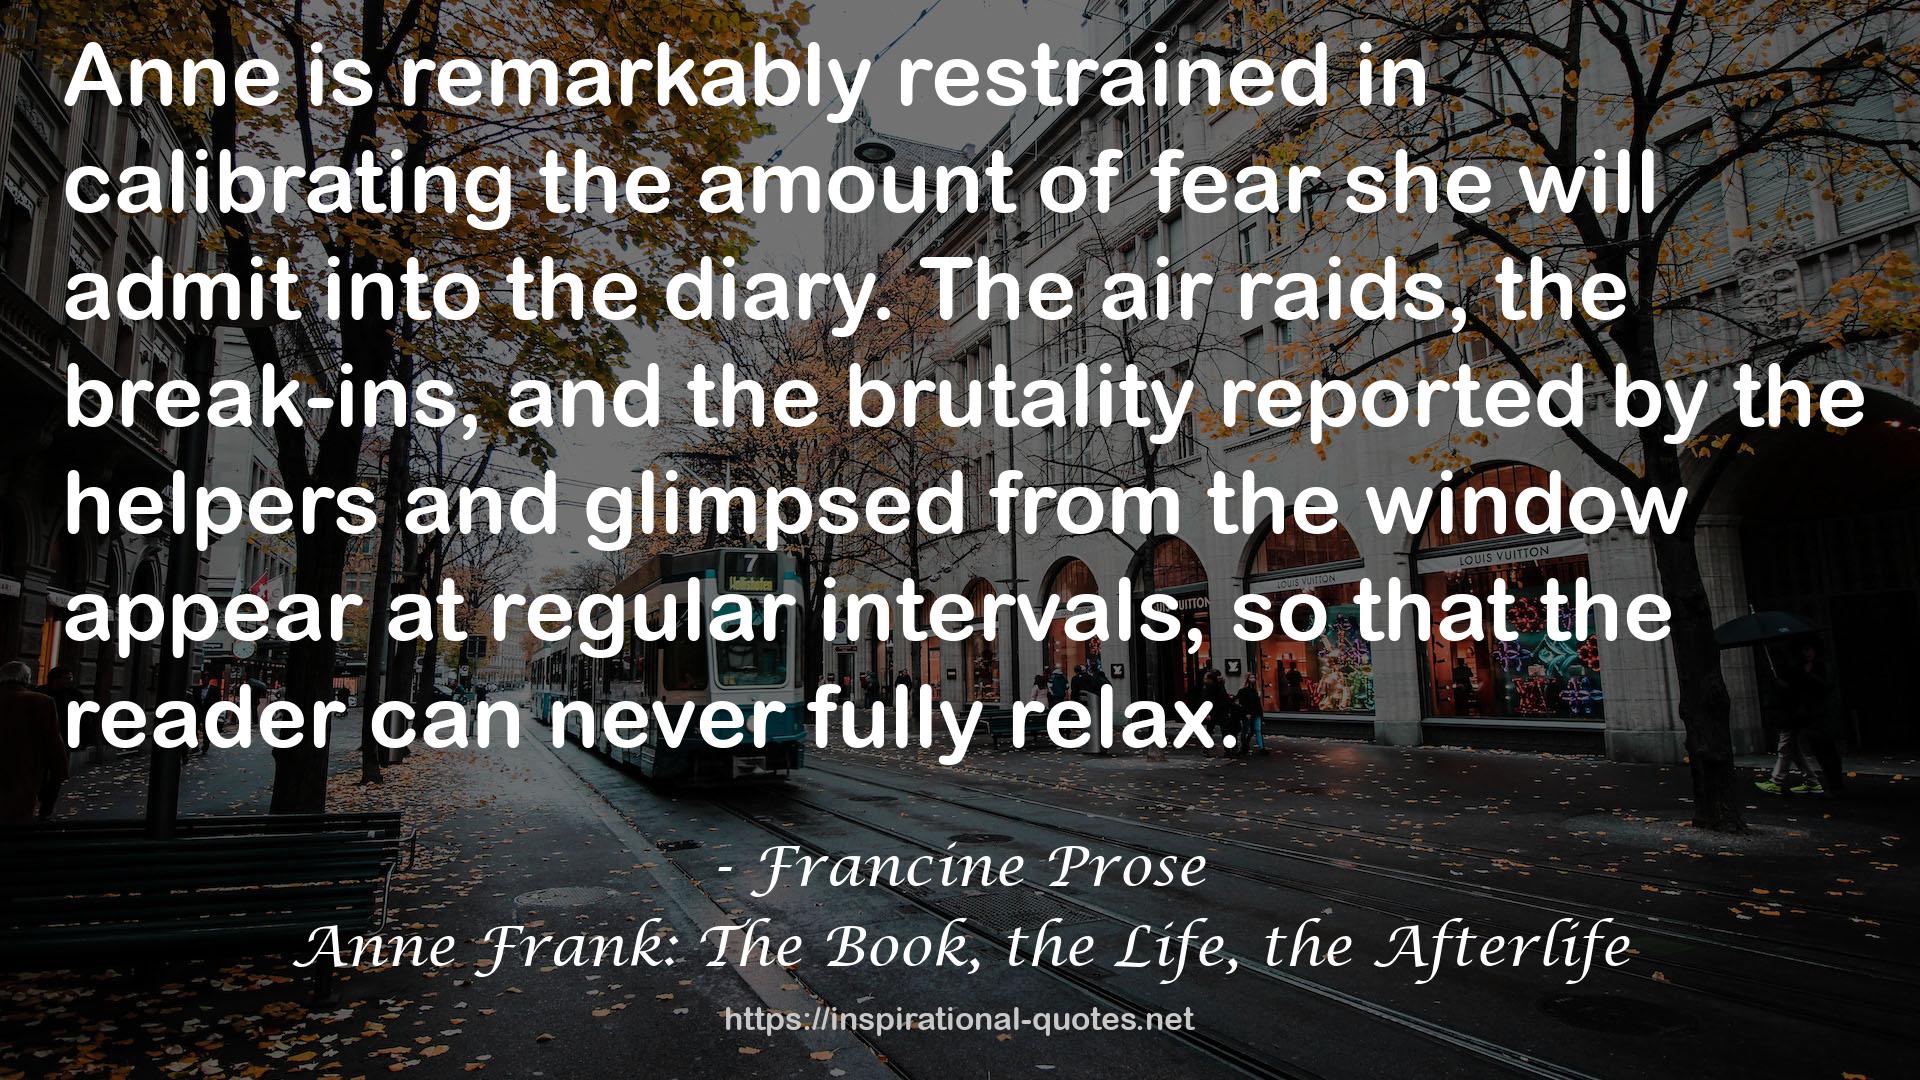 Anne Frank: The Book, the Life, the Afterlife QUOTES